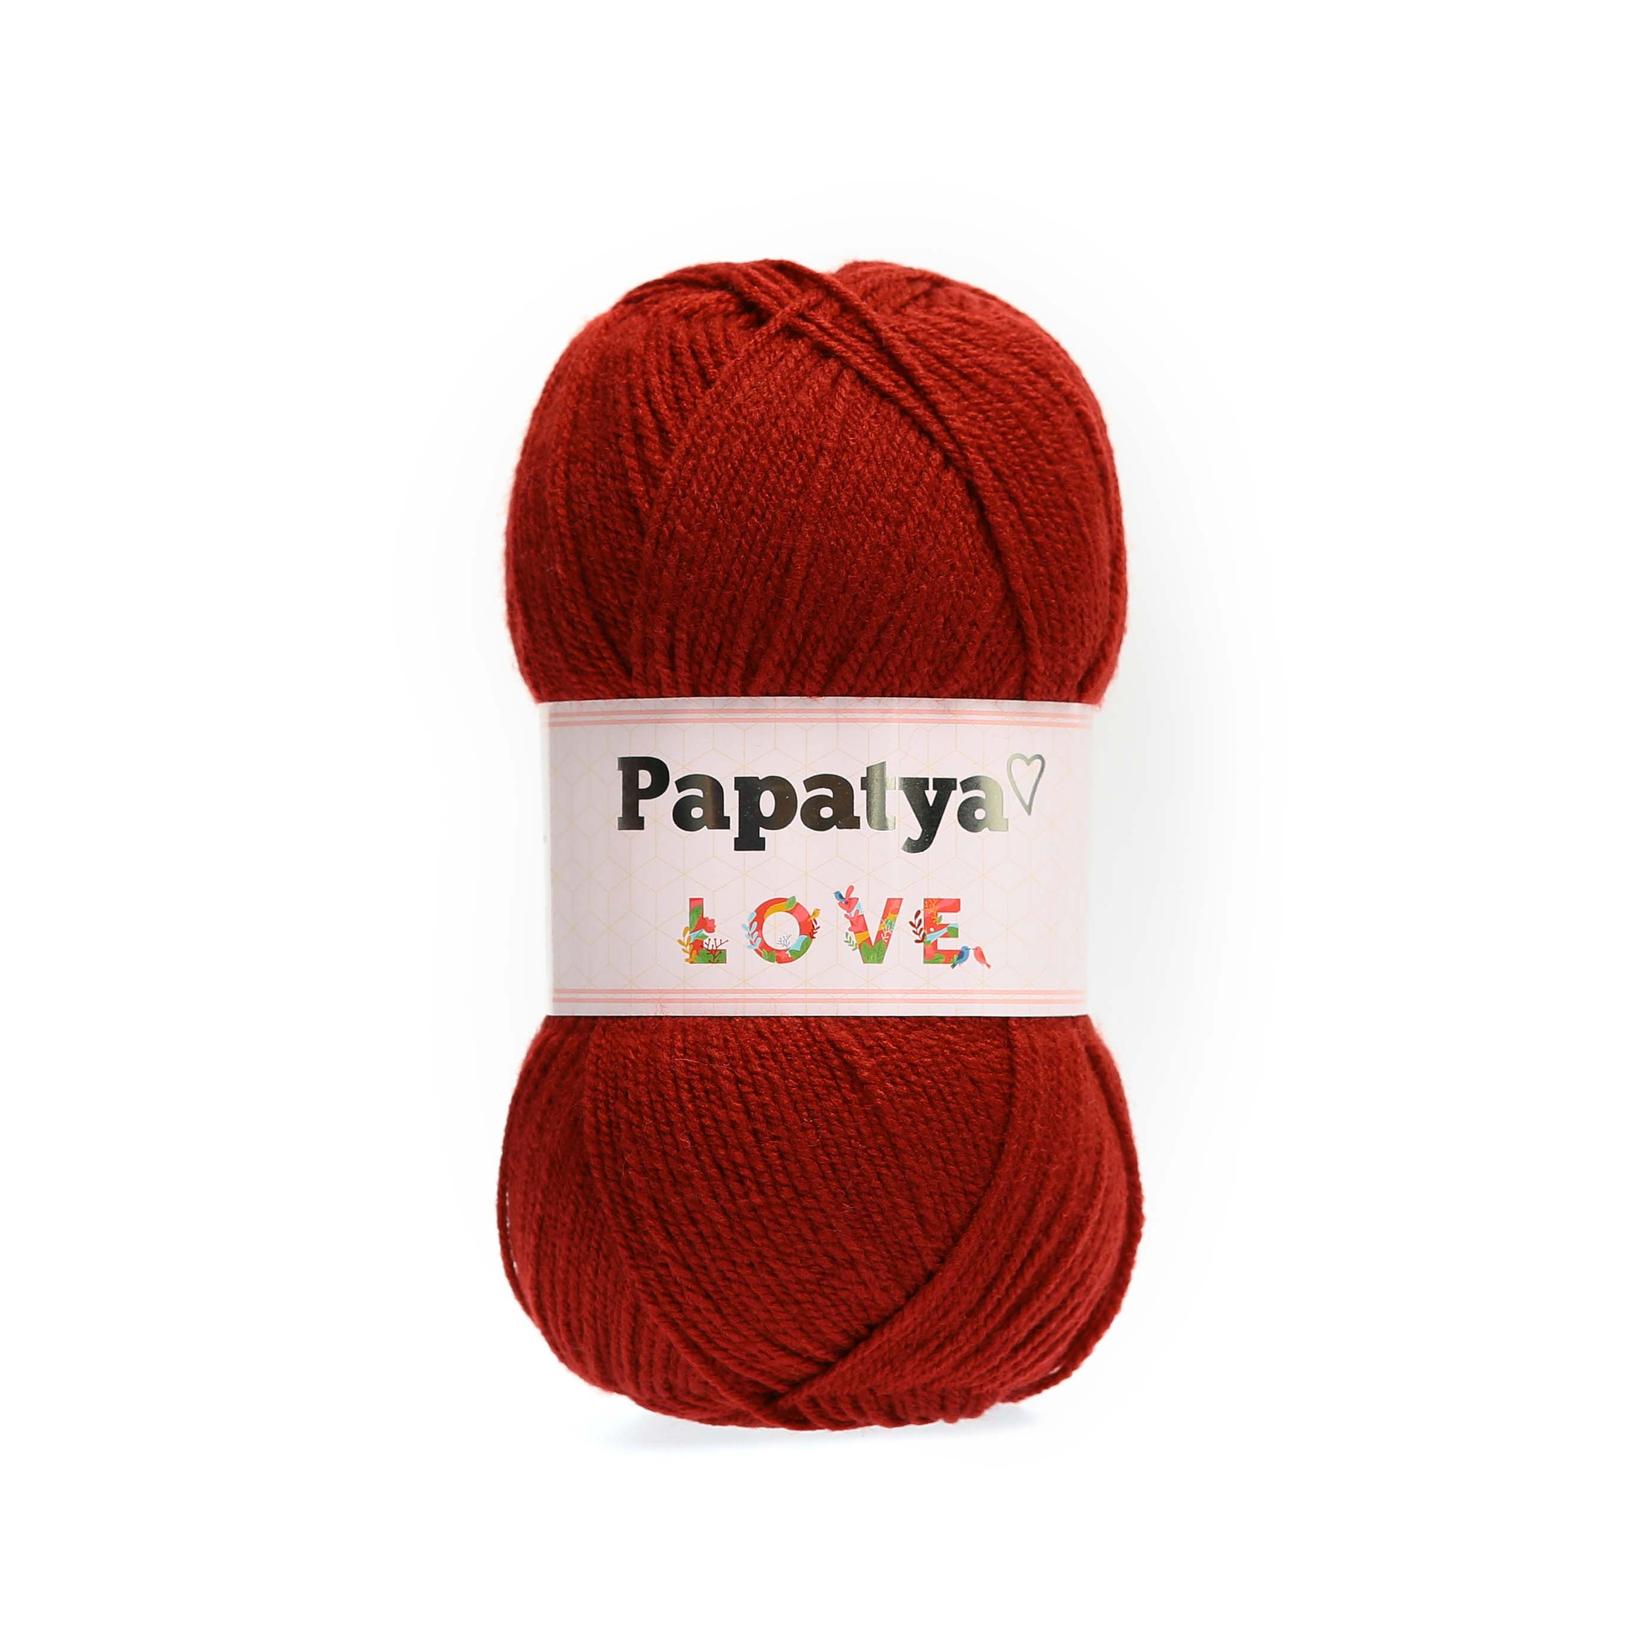 Selected image for PAPATYA Vunica Love 3250